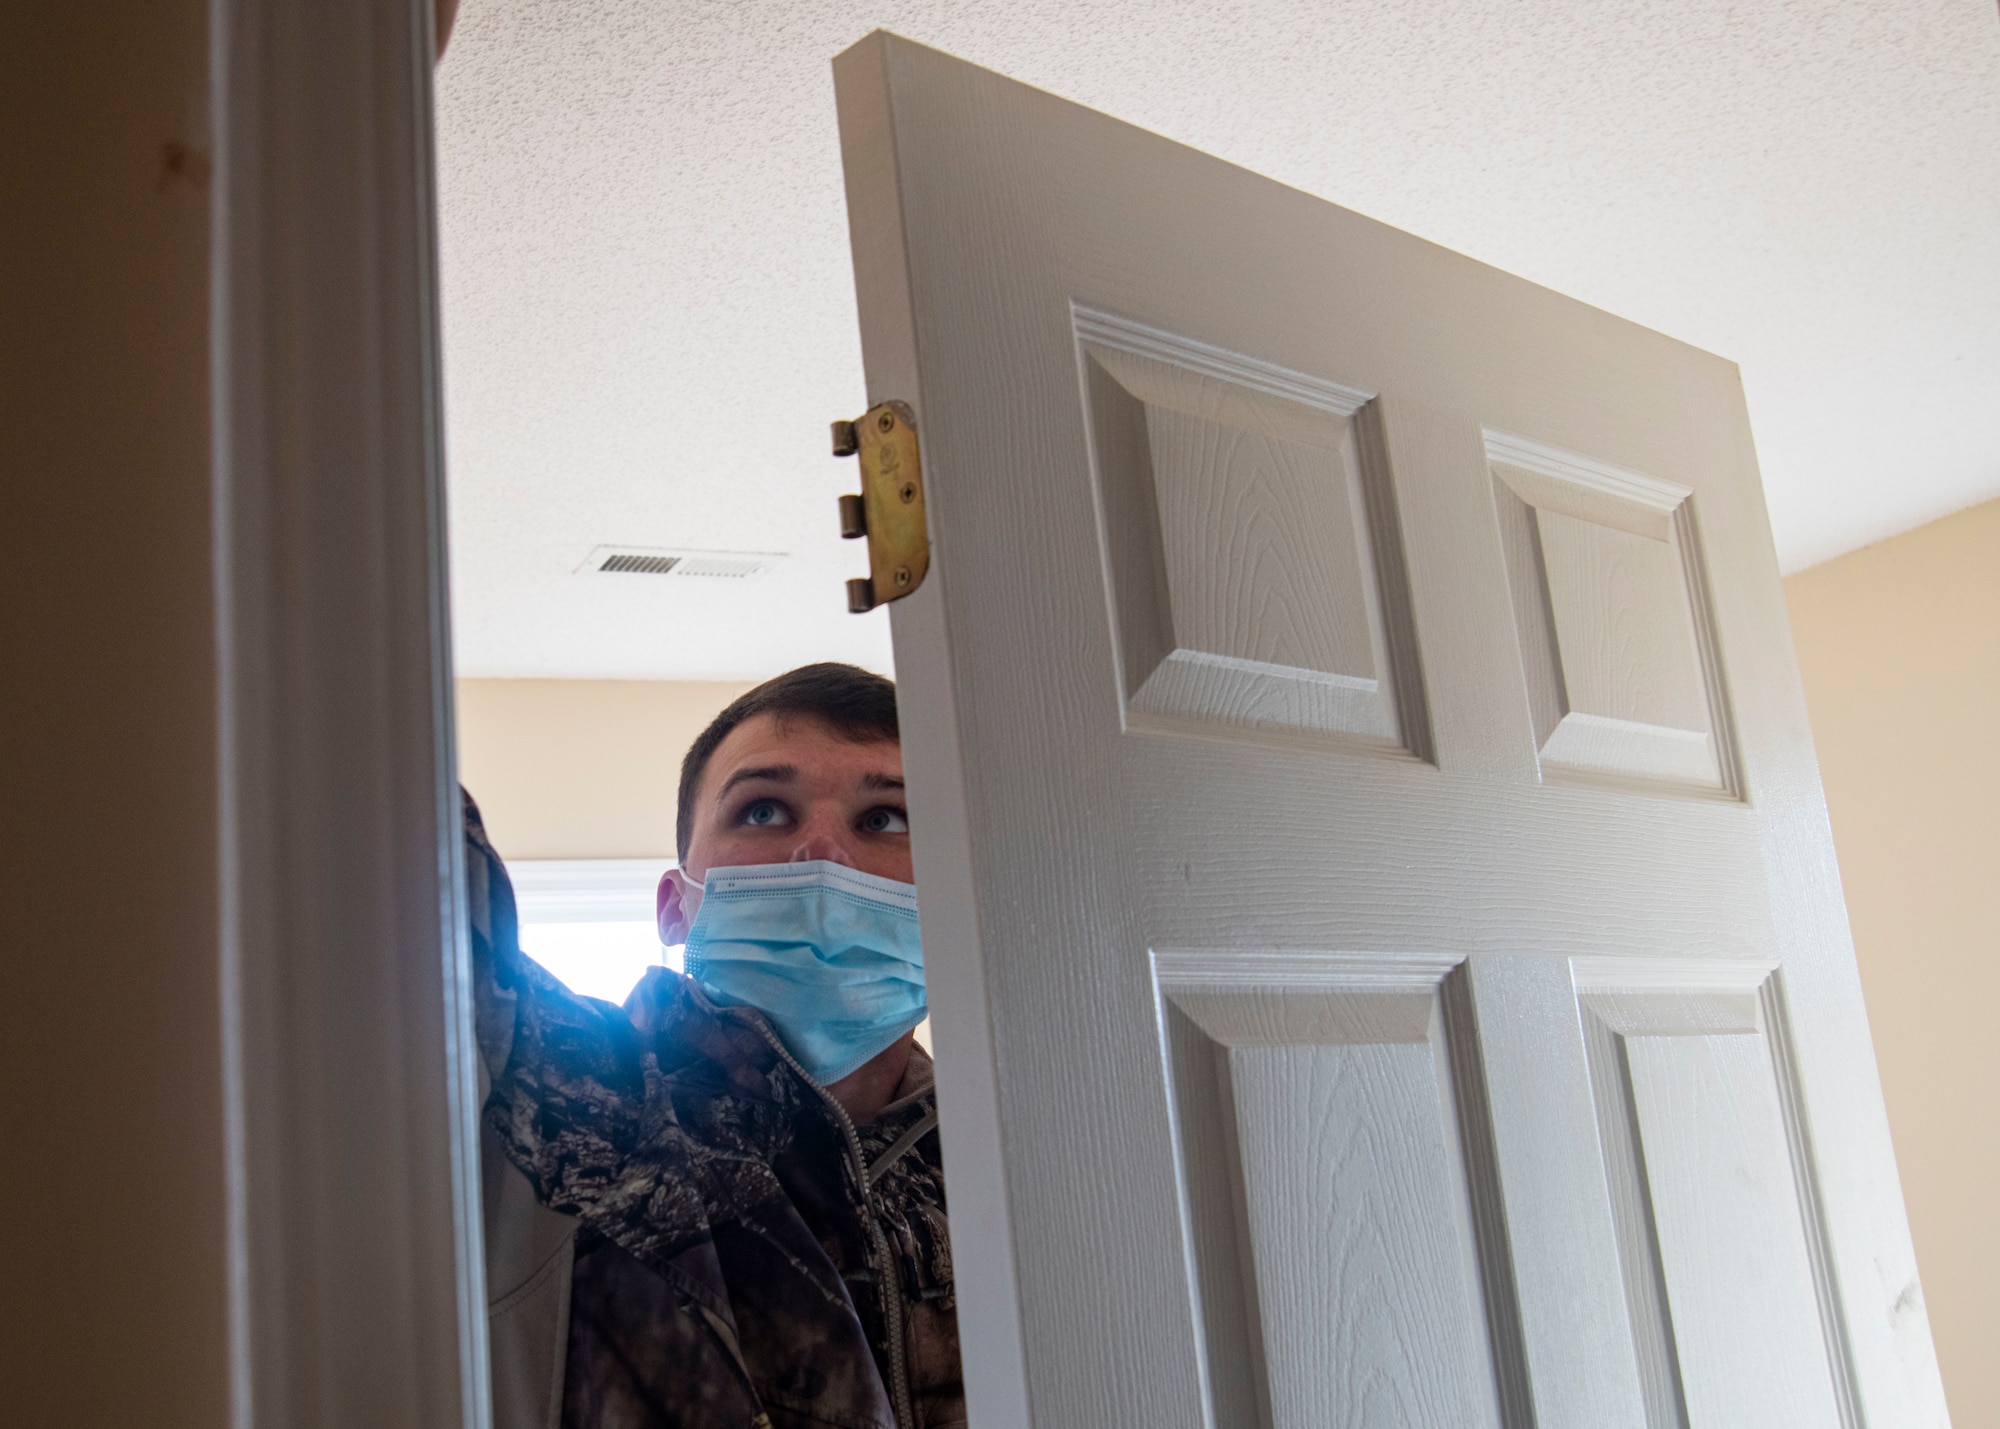 Photo of Airman putting together a door